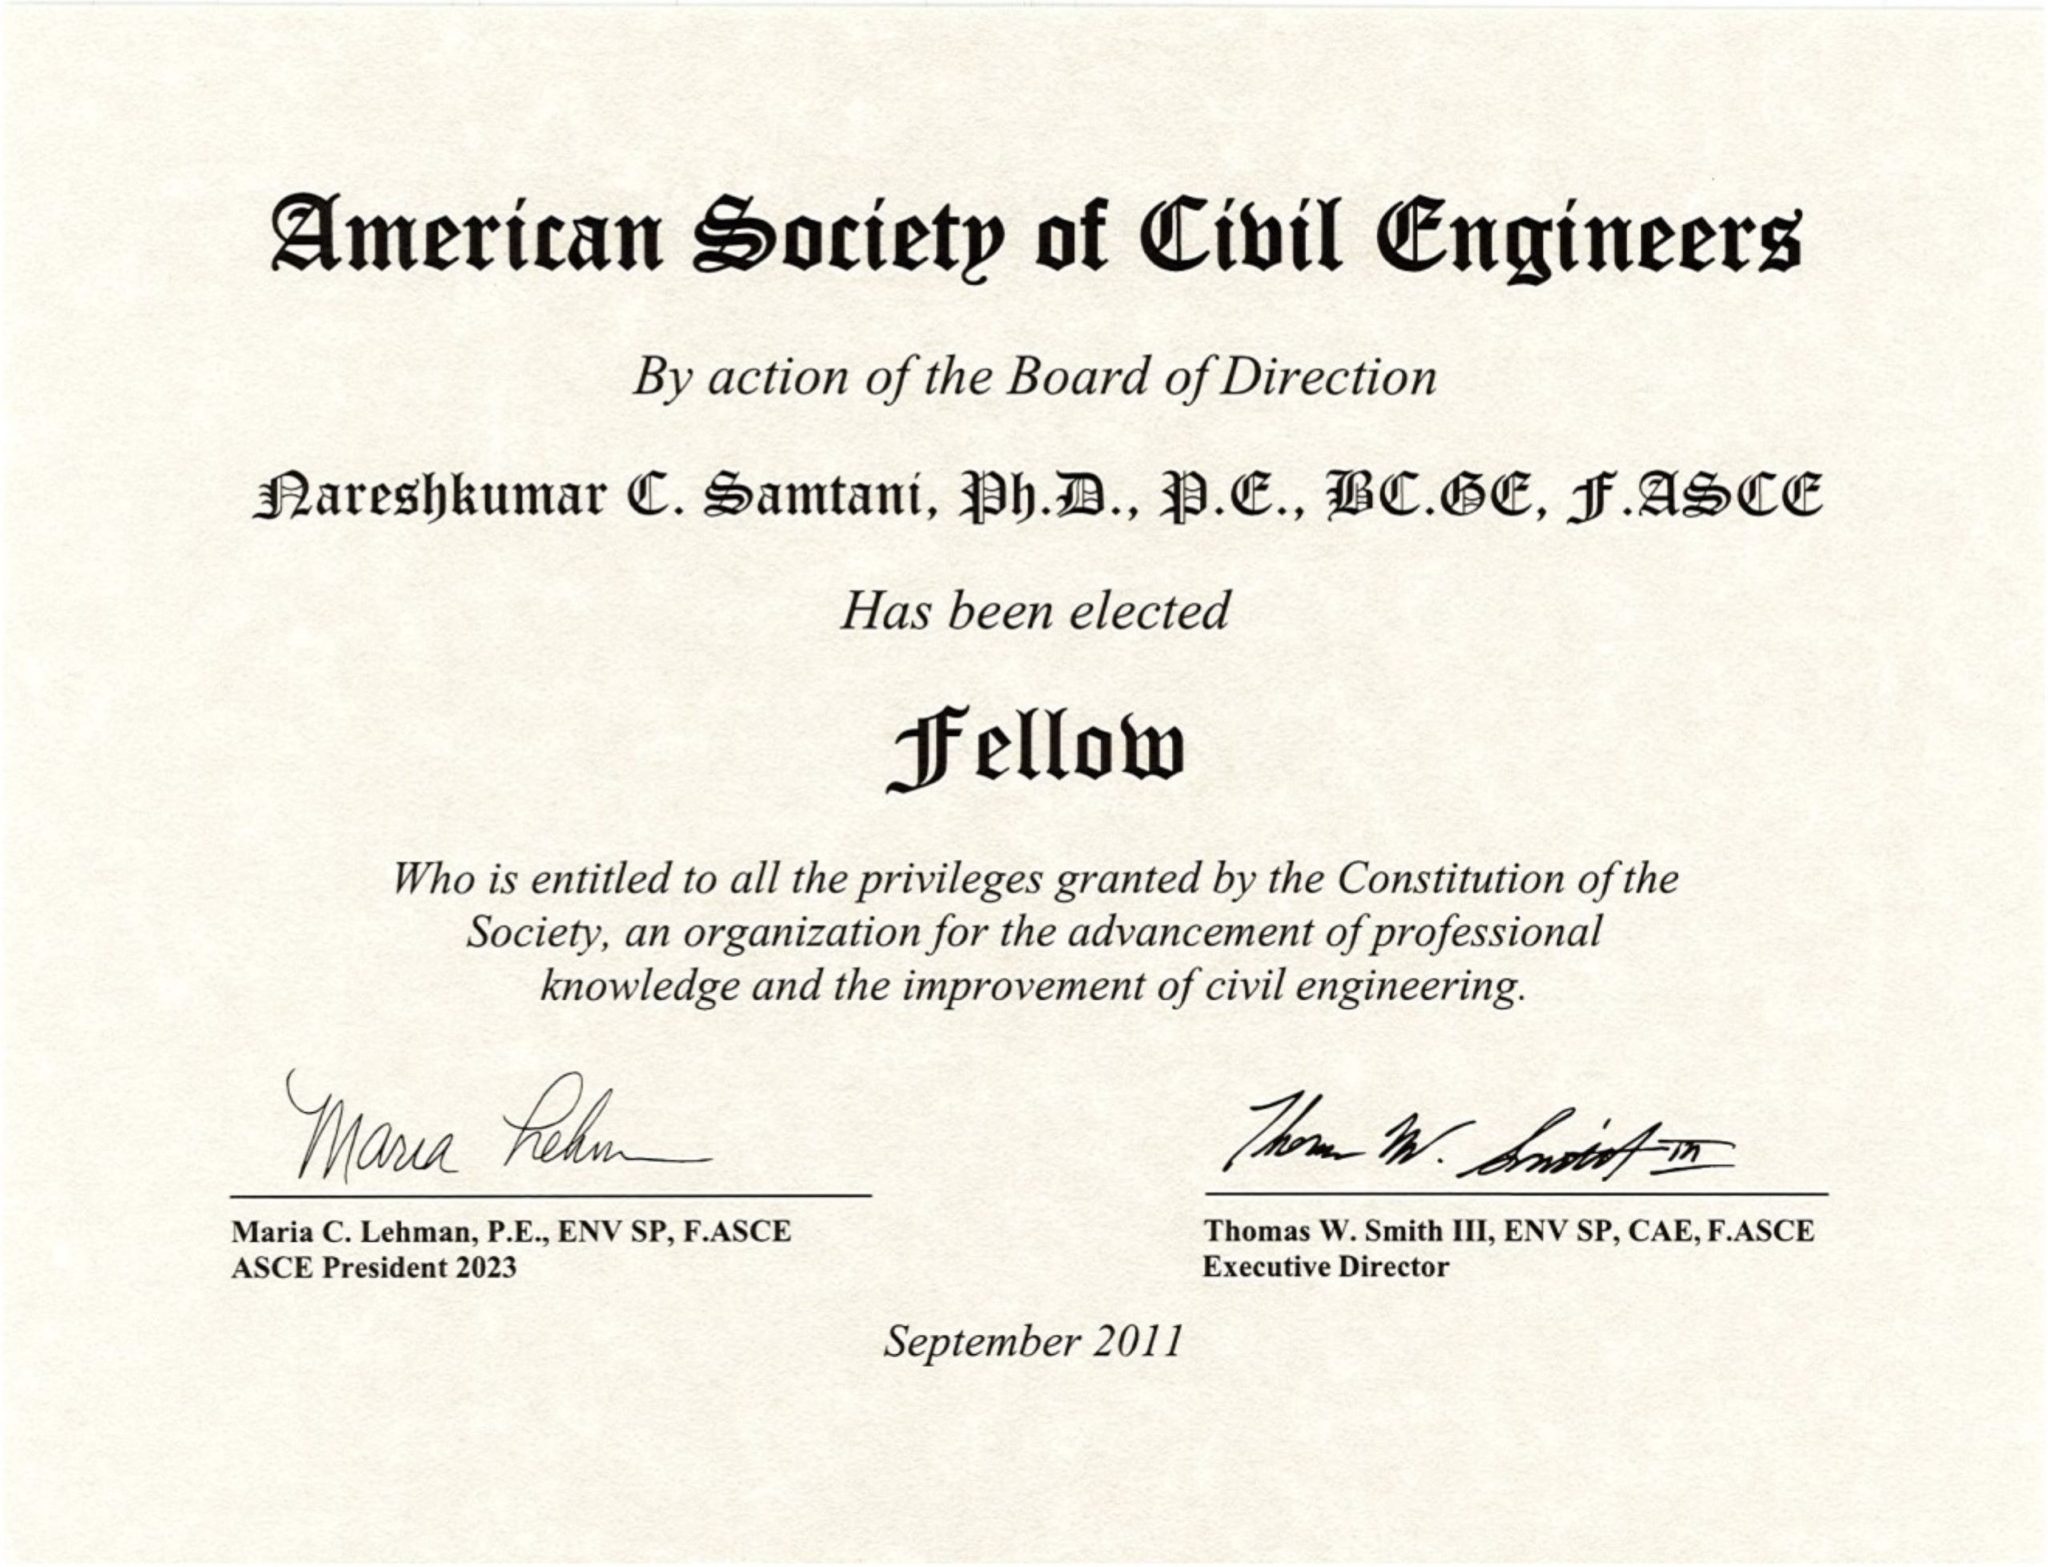 ASCE fellows have made celebrated contributions and developed creative solutions that change lives around the world. It is a prestigious honor held by 3% of ASCE members.